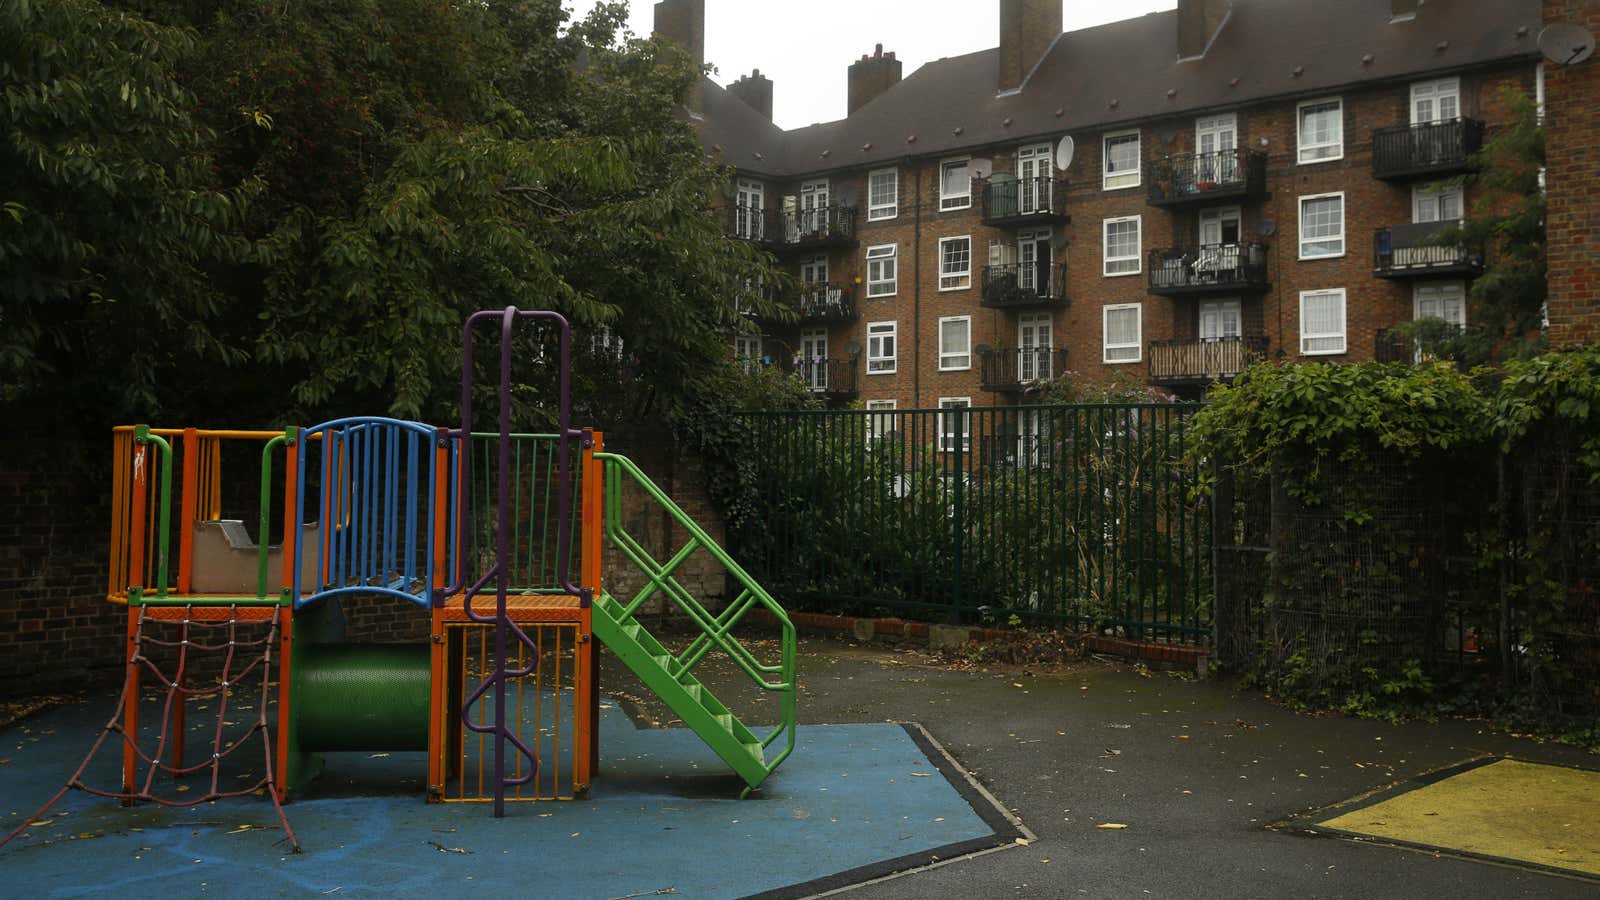 Playgrounds—like this one located in the London borough of Islington—should be for all kids.